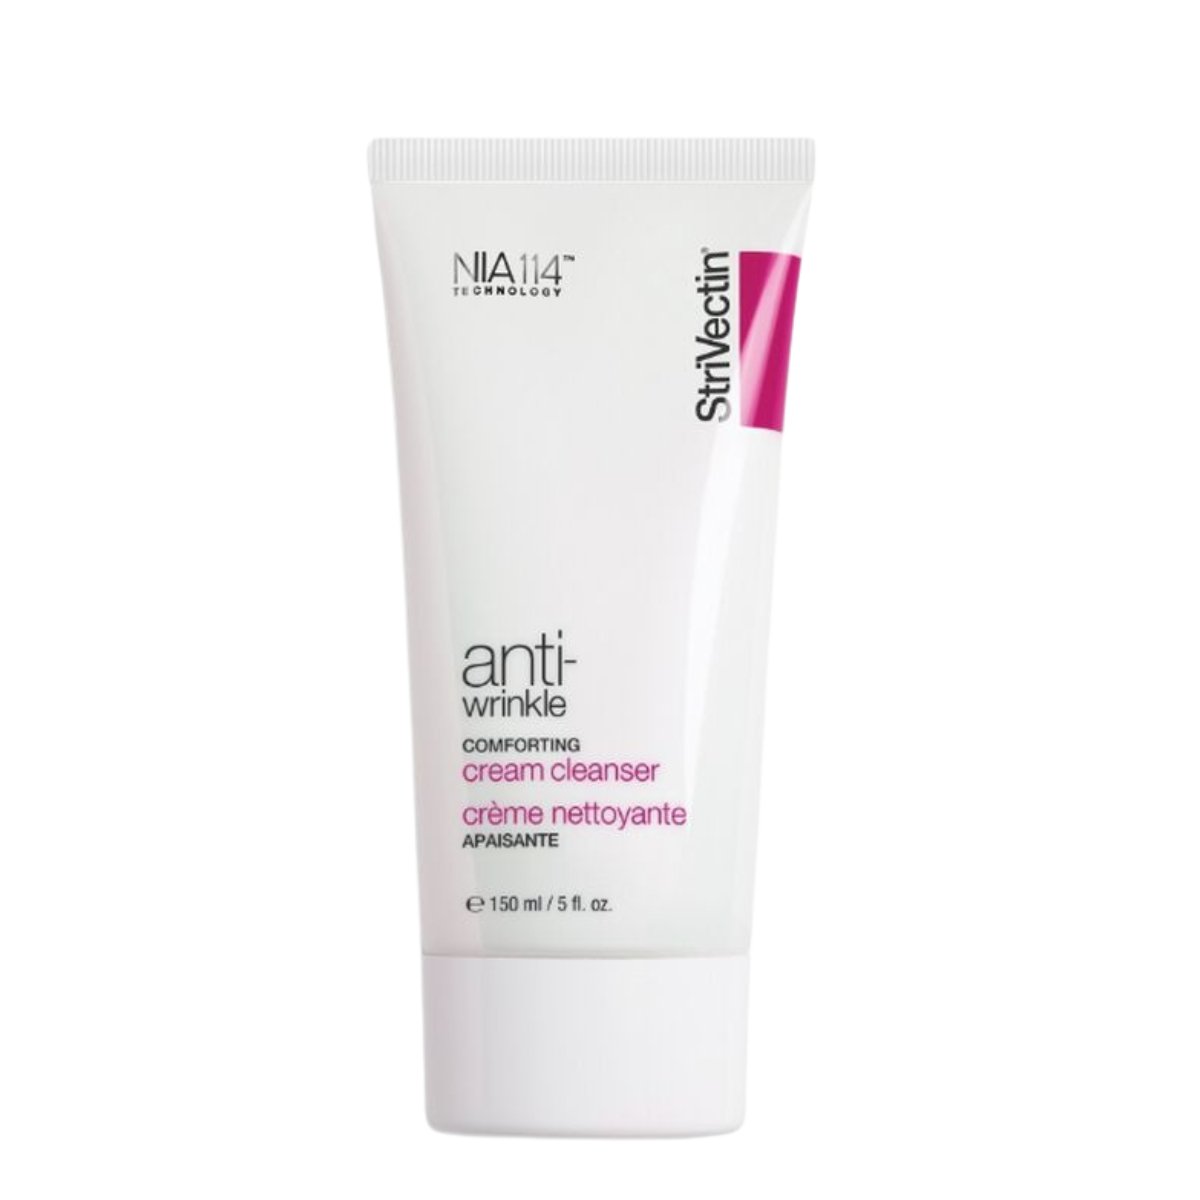 StriVectin Anti-Wrinkle Comforting Cream Cleanser